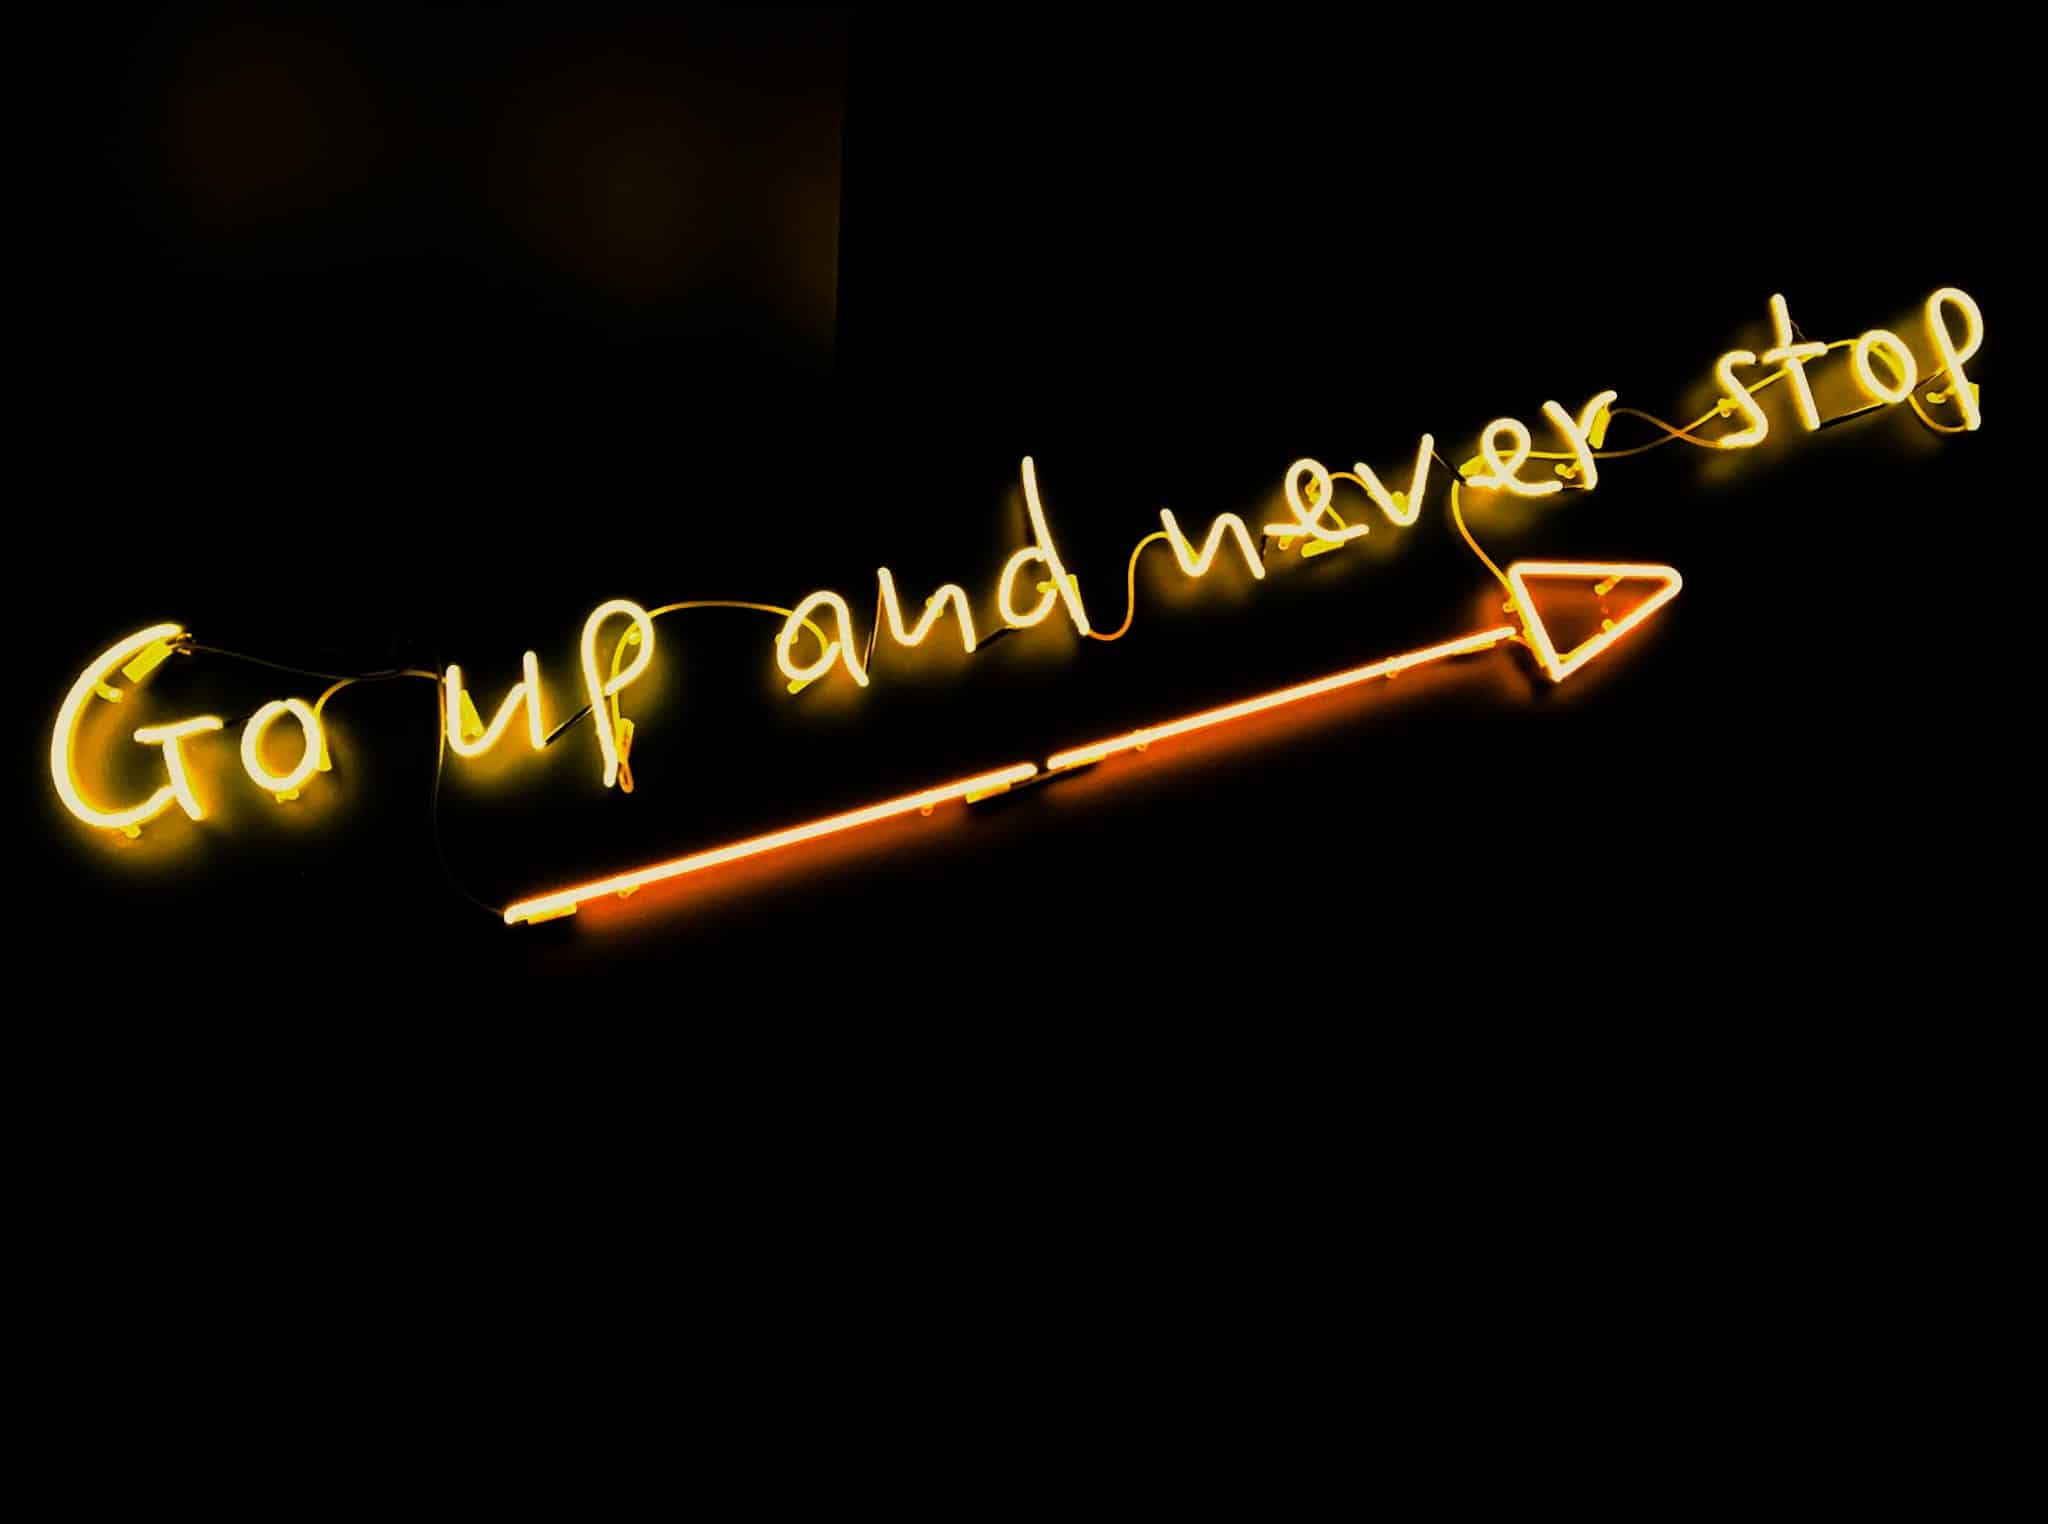 a neon sign that says 'go up and never stop' with an arrow beneath it sloping upwards